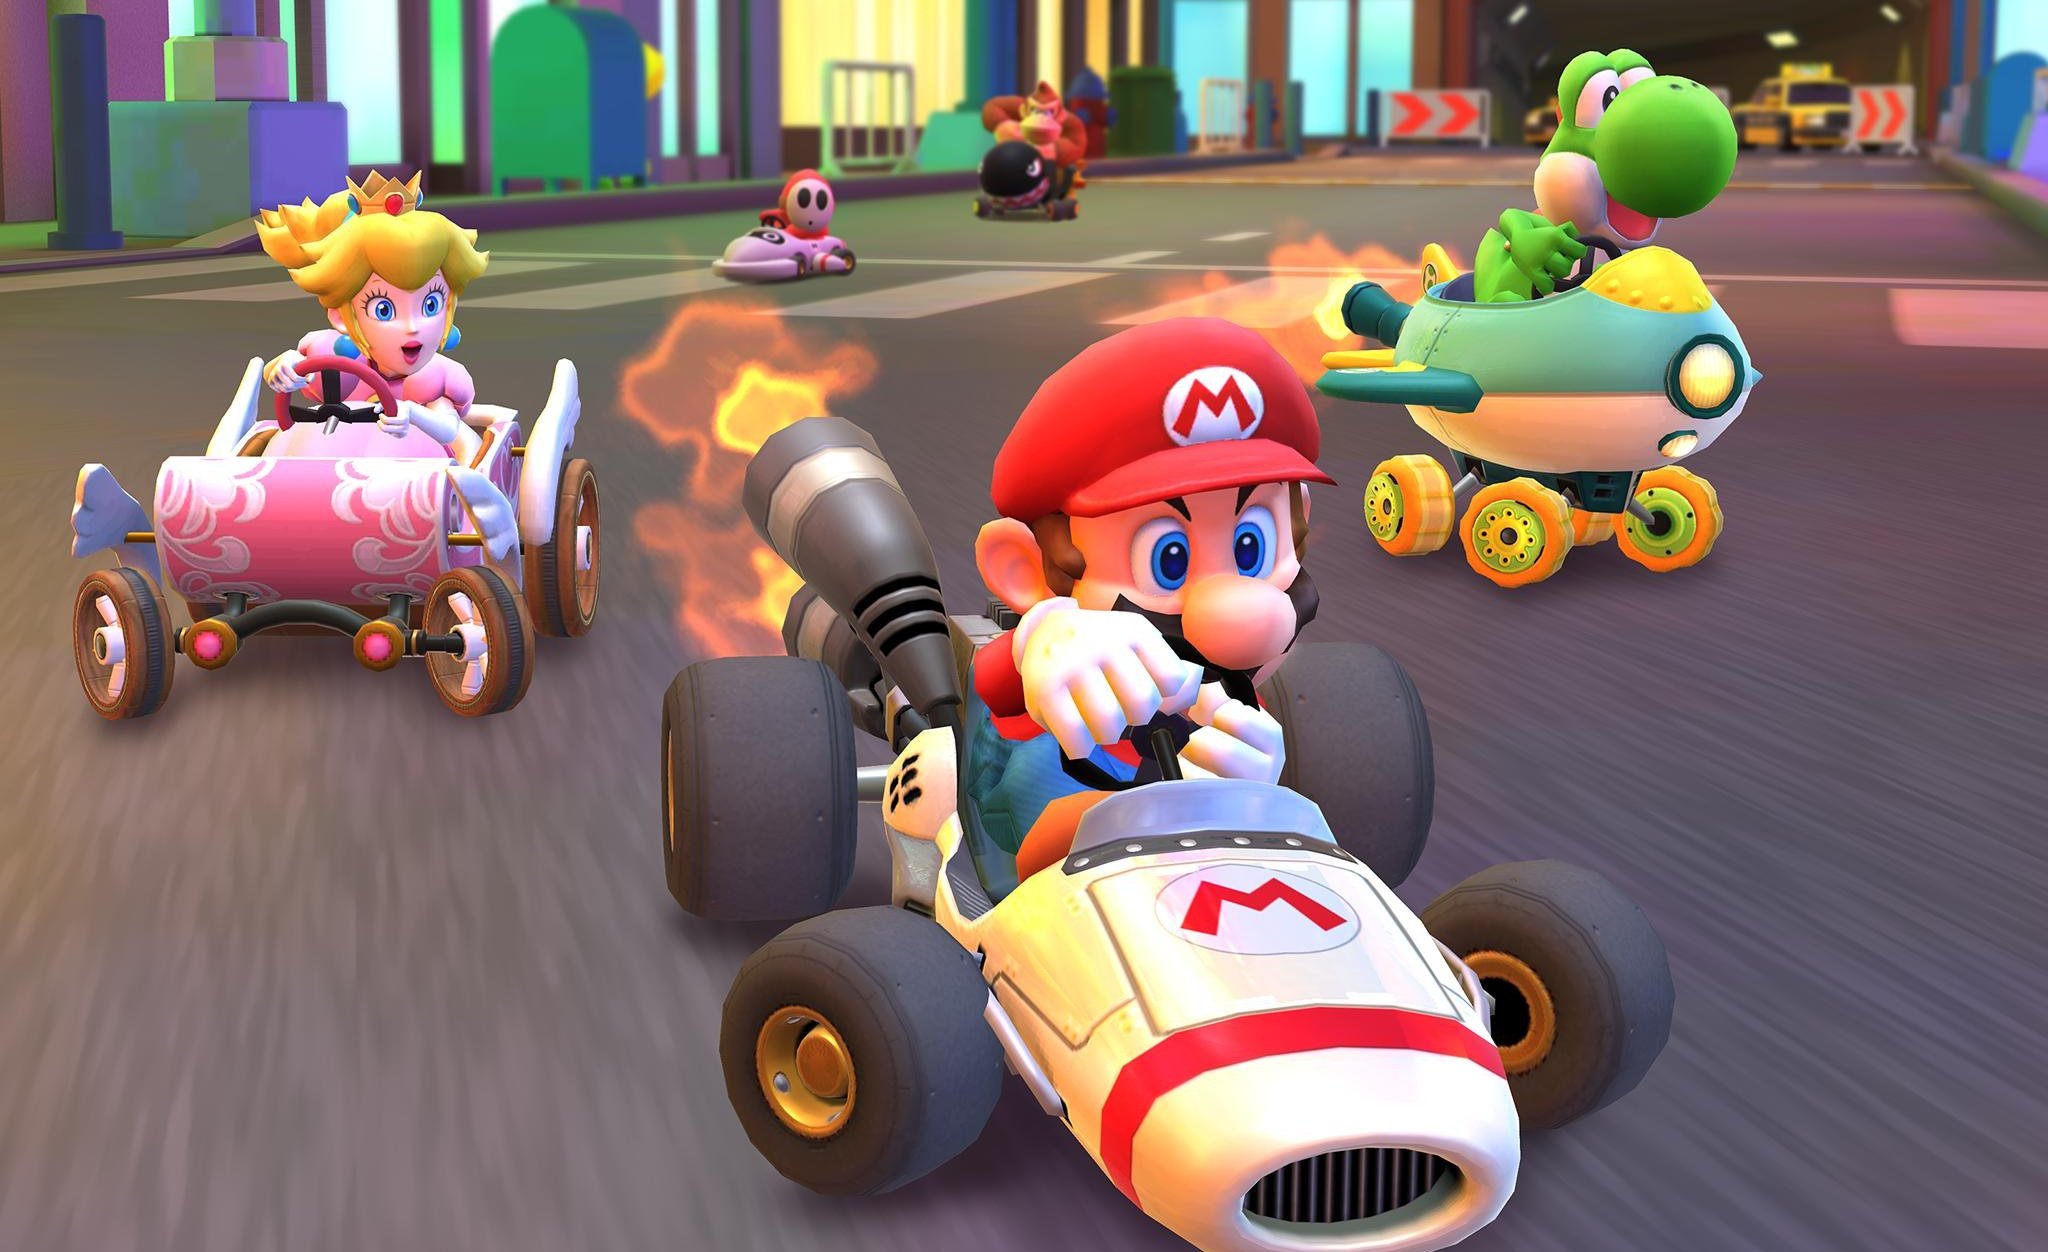 mario-kart-tour-is-now-live-on-smartphones-but-good-luck-getting-to